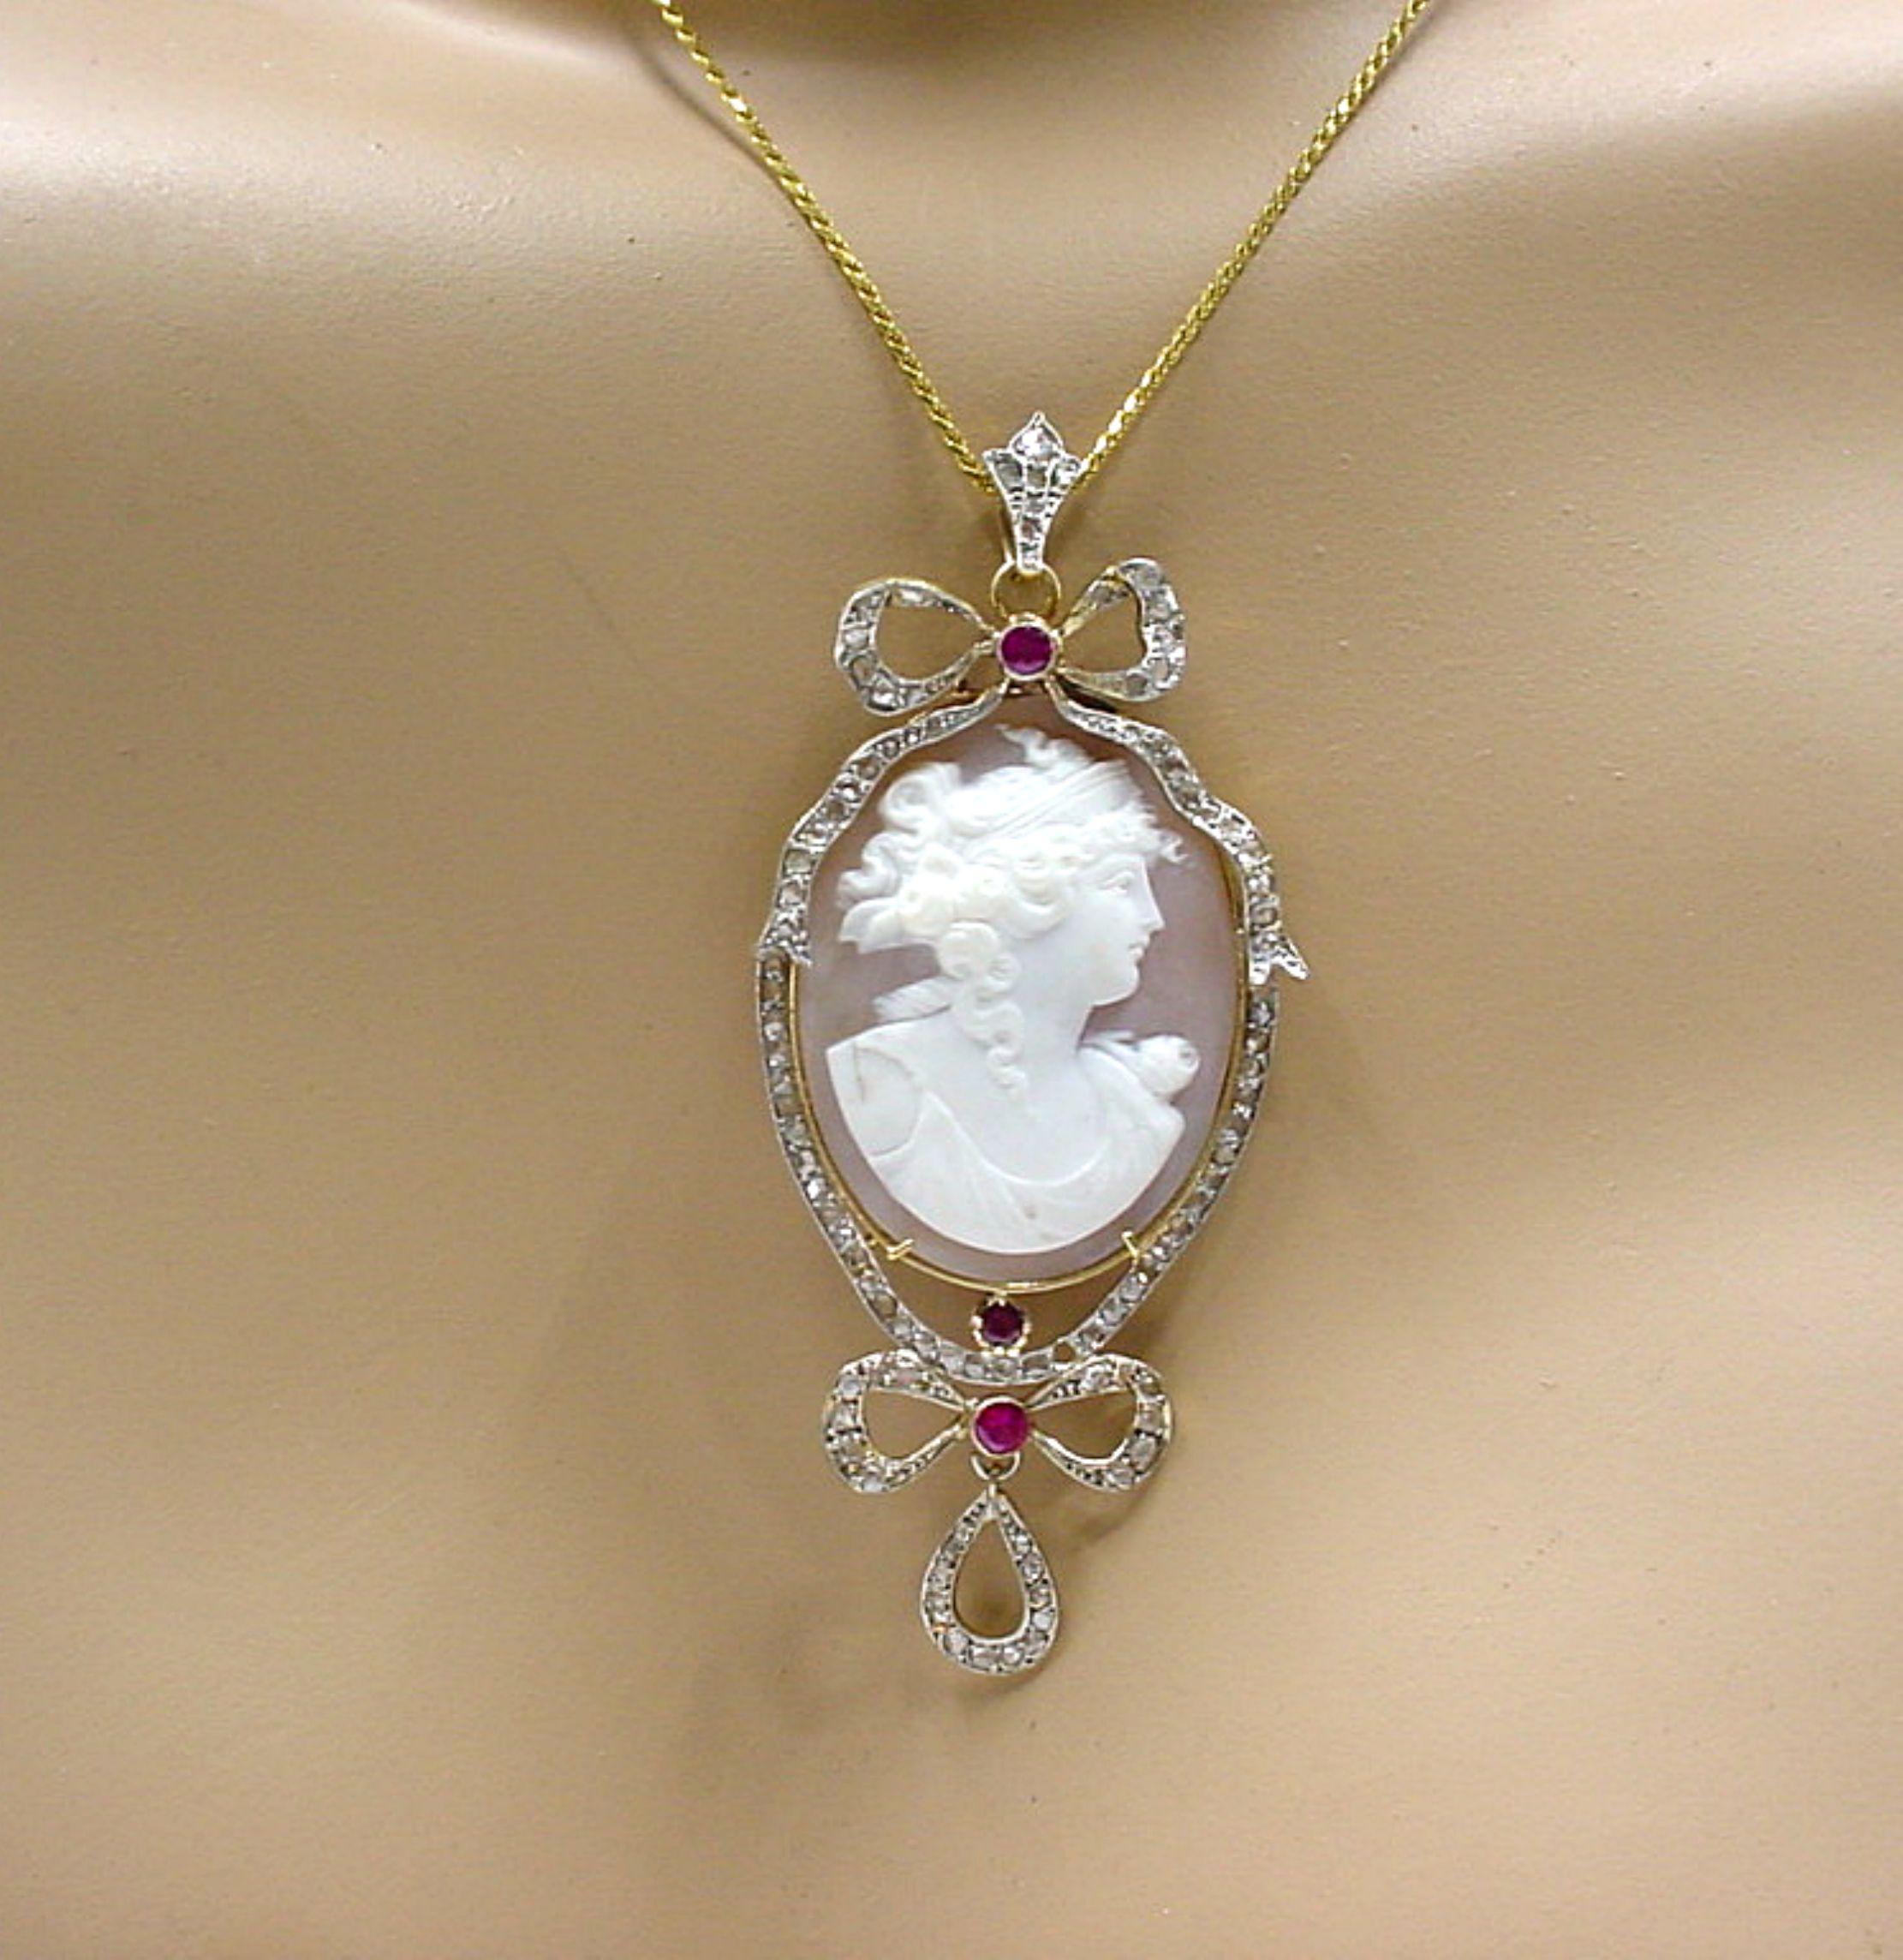 Elegant and wearable  Edwardian card shell cameo with a dazzling frame of old cut diamond and ruby gemstones...

The dramatic and large pendants' frame rendered in sumptuous platinum topped 18k gold~

METAL: 18k Gold/Platinum. 
GEMSTONES: Rose cut